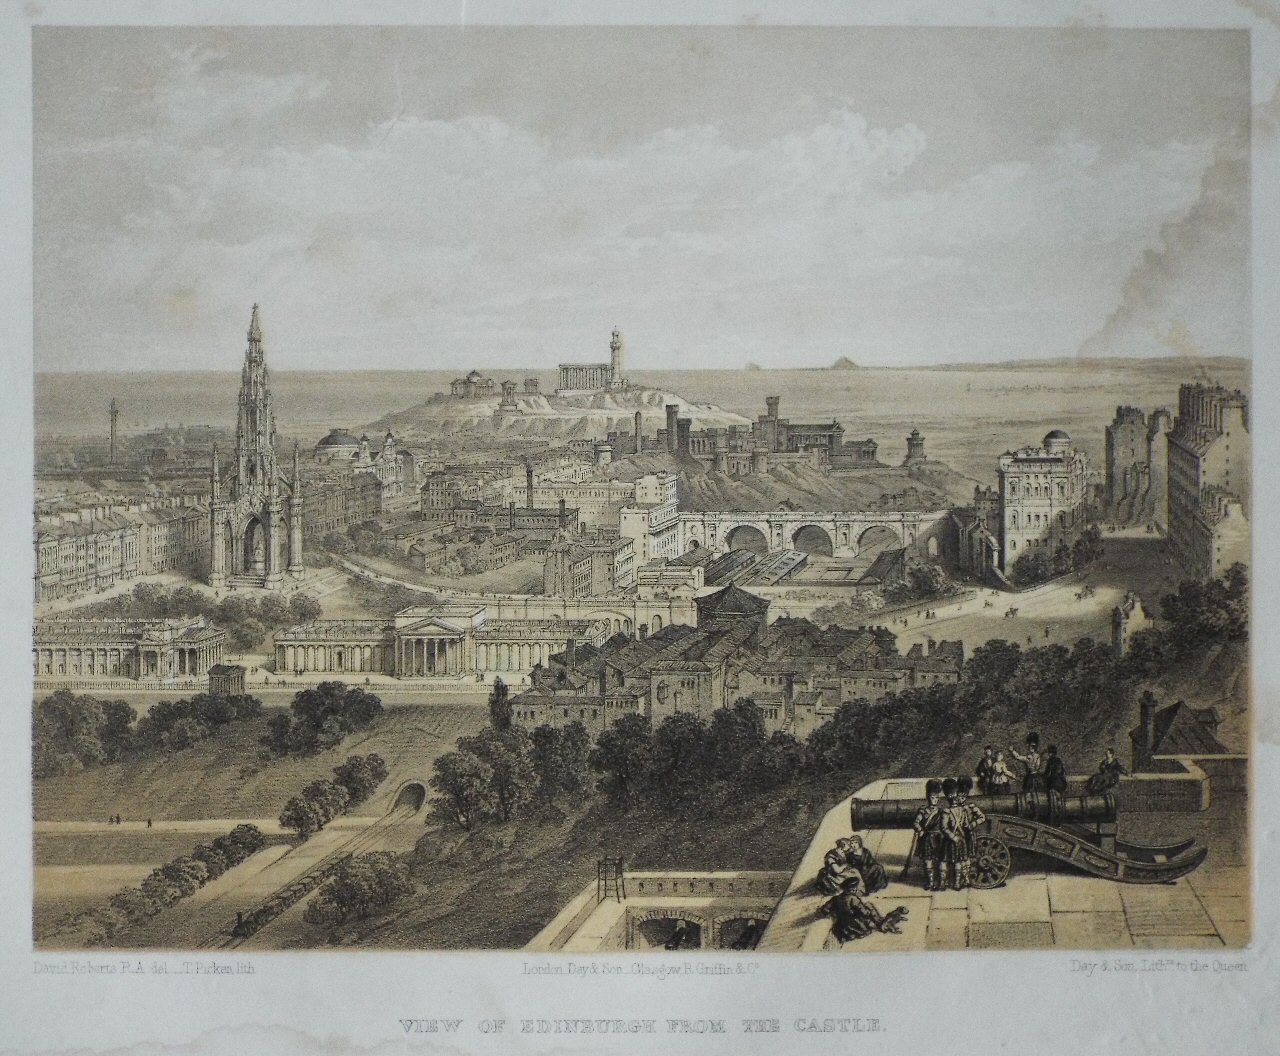 Lithograph - View of Edinburgh from the Castle. - Picken